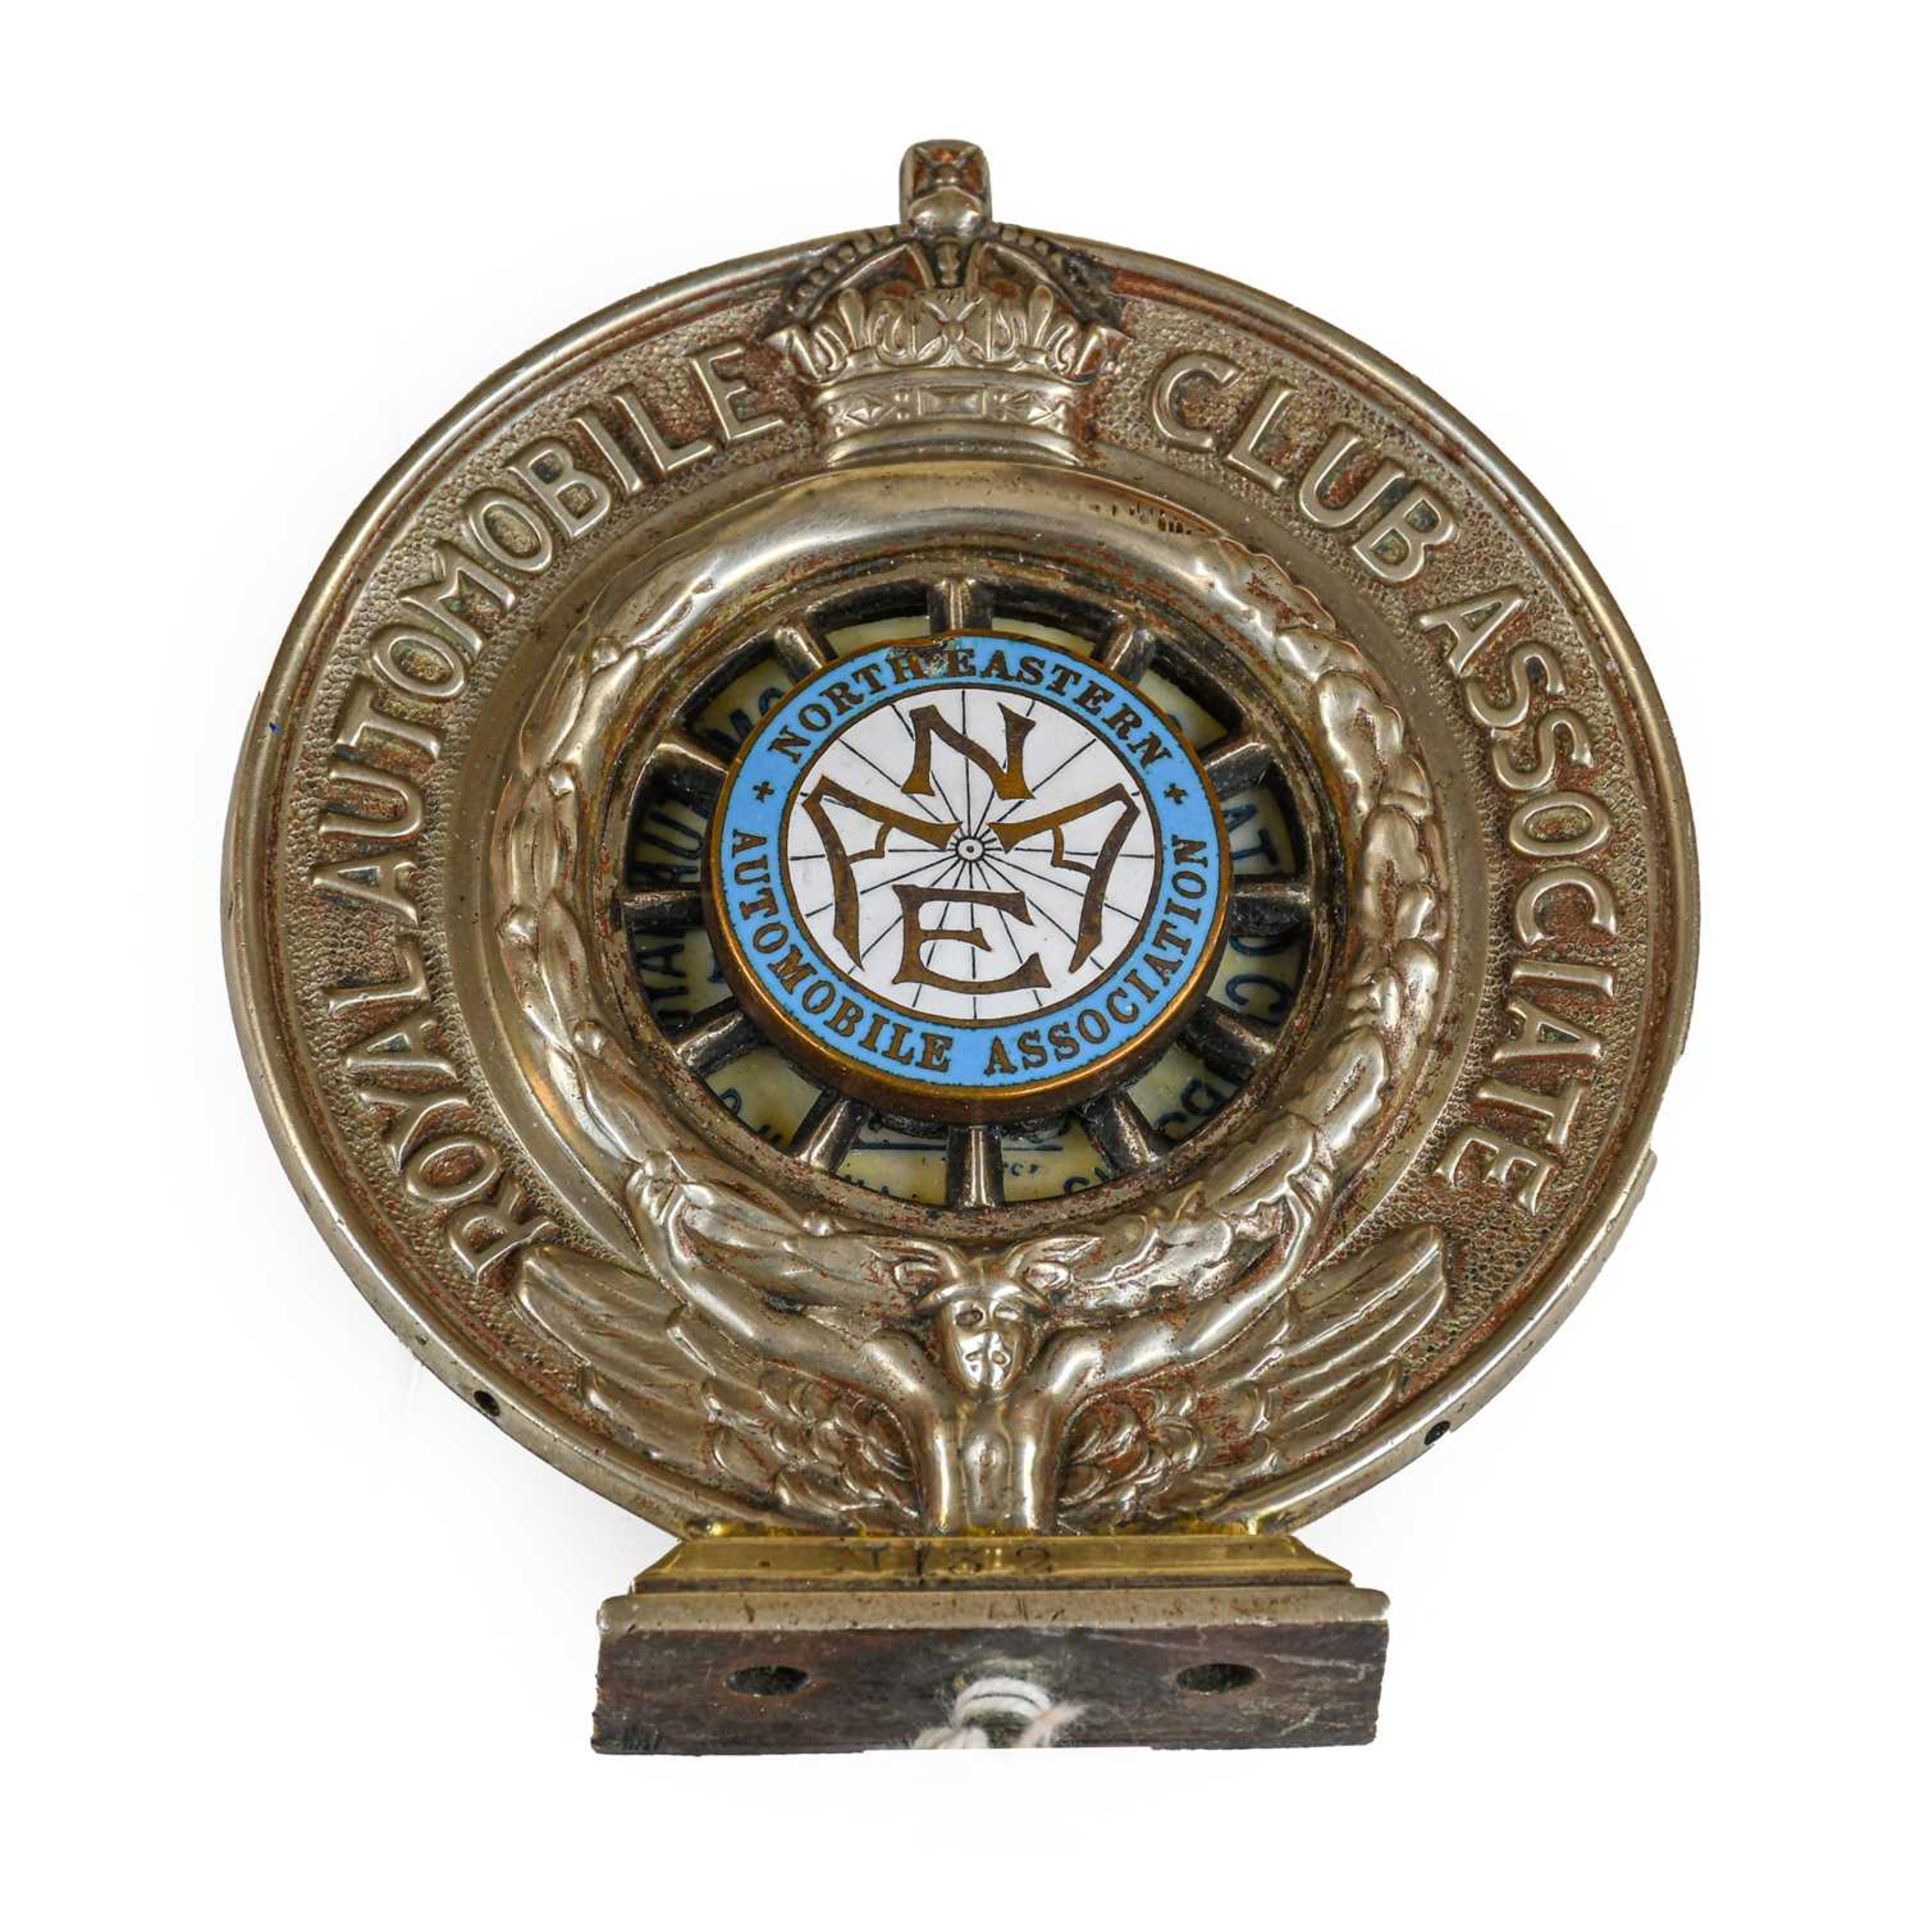 Alkerton & Co: A Silver Plated Royal Automobile Club Associate Car Mascot, no.N132 and enamelled